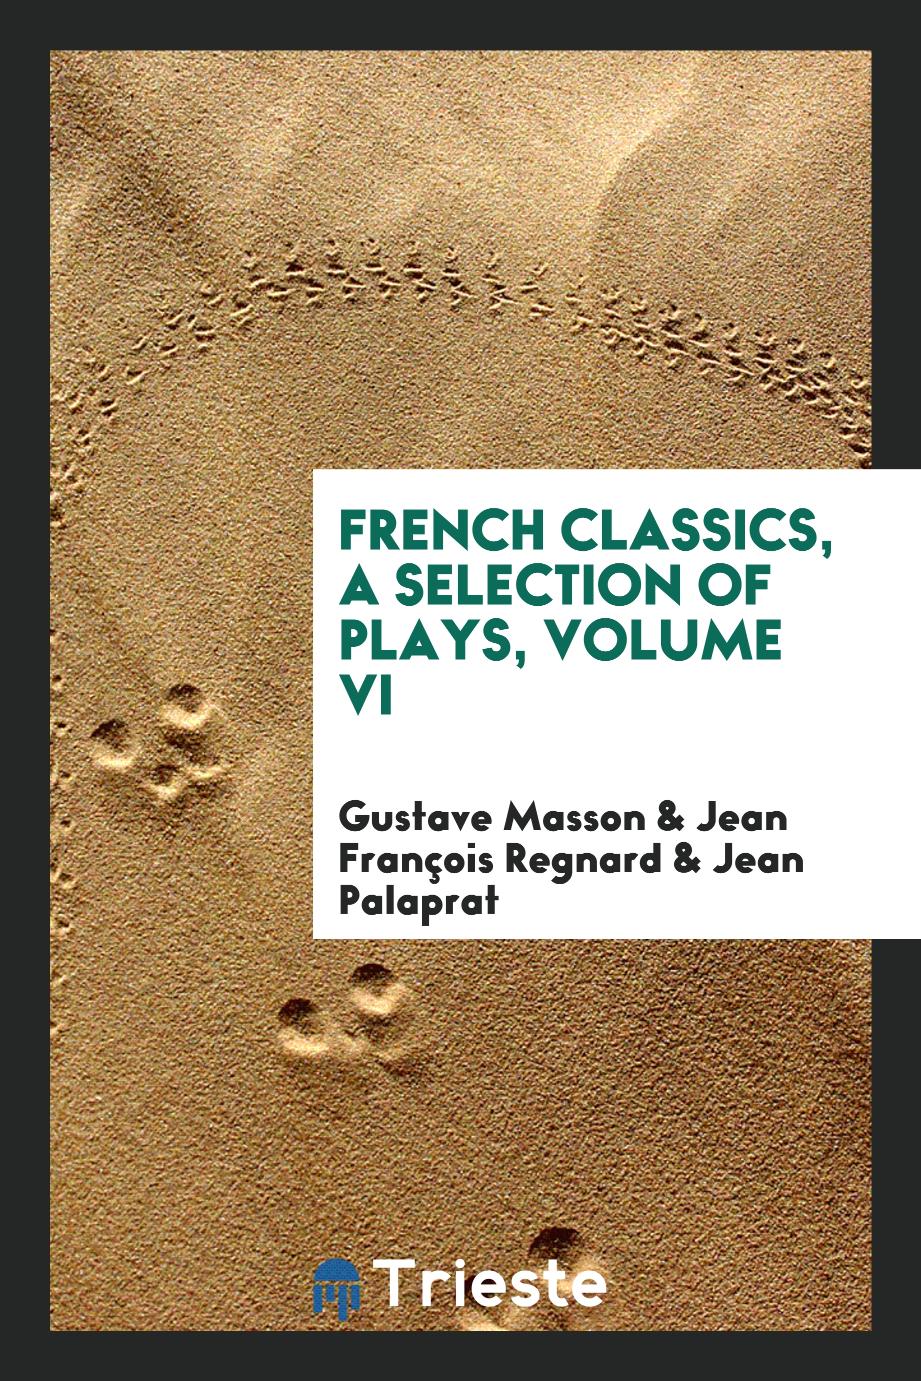 French Classics, A selection of plays, Volume VI